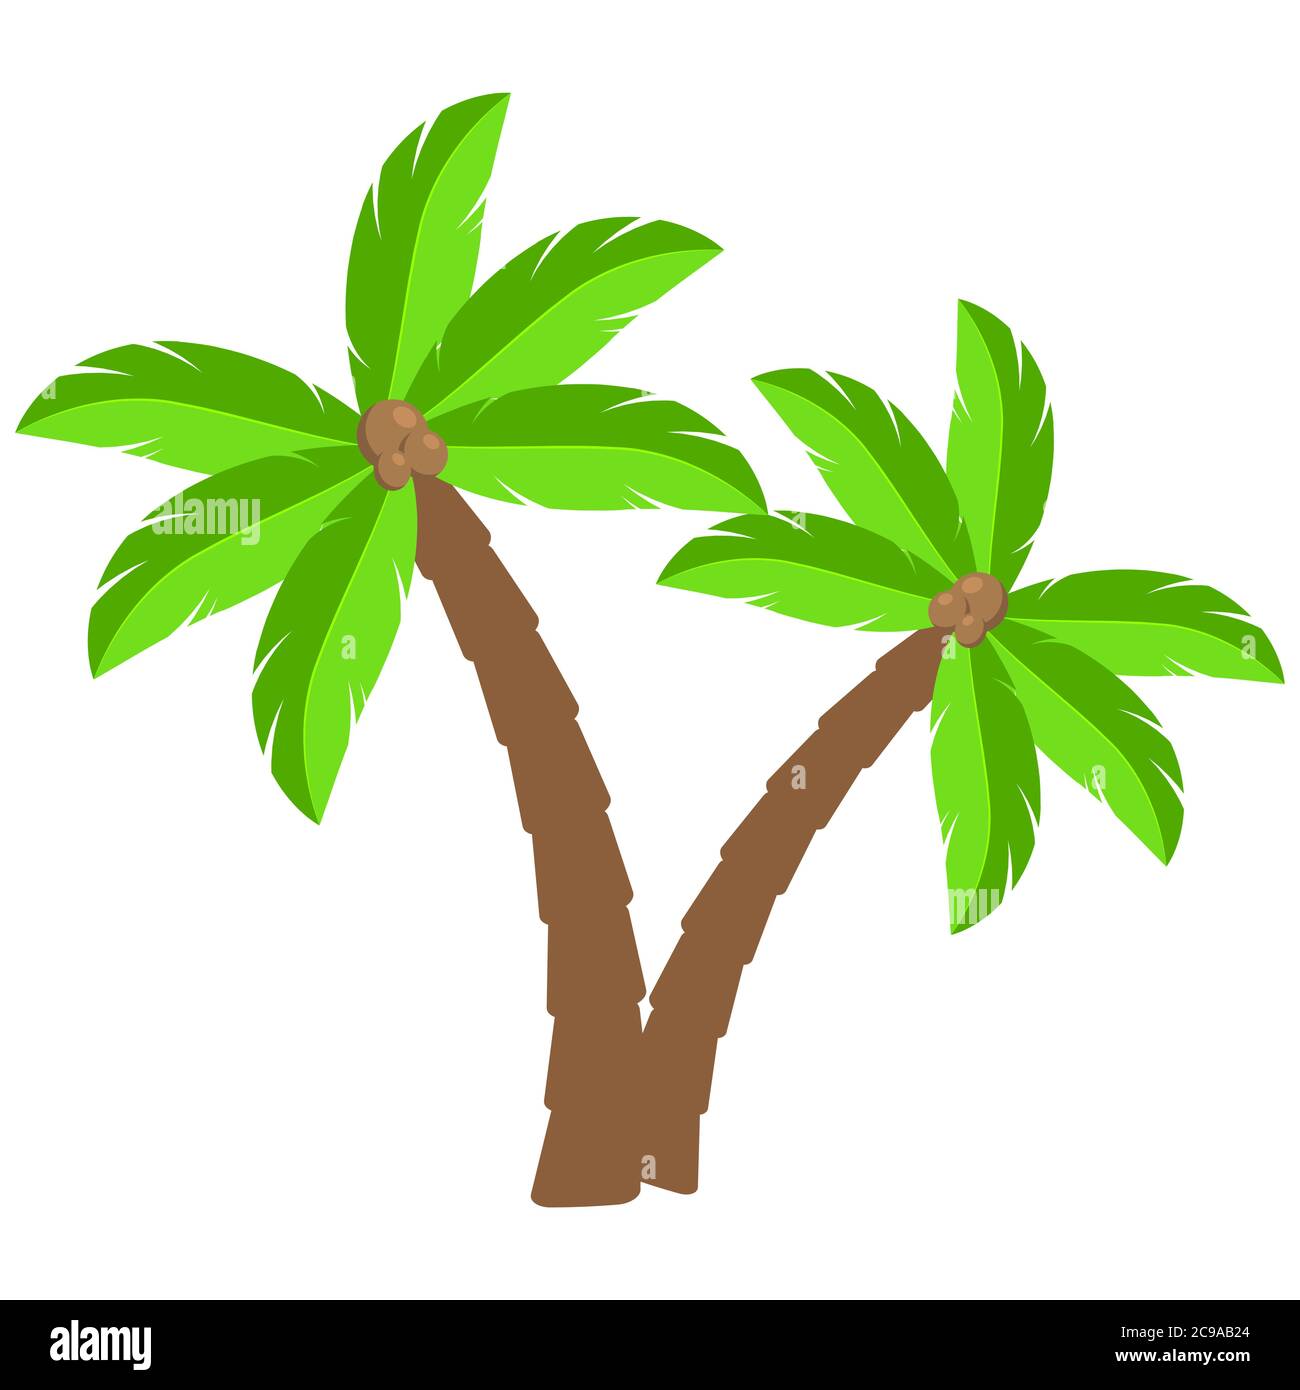 Tropical palm trees cartoon illustration.Two curved coco palm isolated on white.  Exotic palmtree illustration. Paradise plants symbol clipart.Design Stock Vector